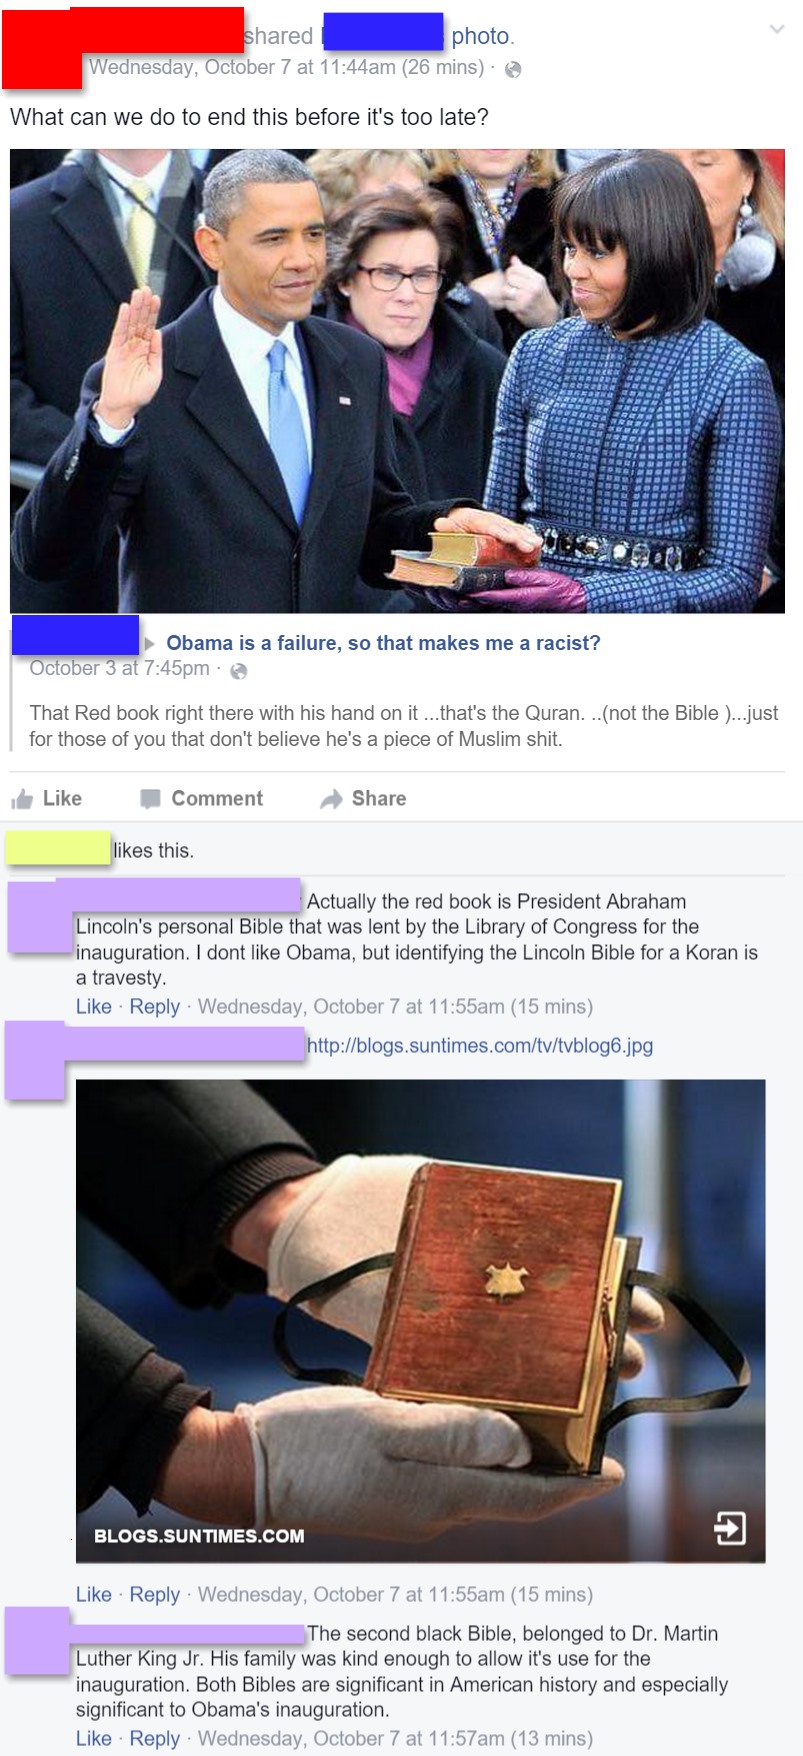 lincoln bible - d photo. Wednesday, October 7 at am 26 mins. What can we do to end this before it's too late? Obama is a failure, so that makes me a racist? October 3 at pm That Red book right there with his hand on it...that's the Quran...not the Bible .